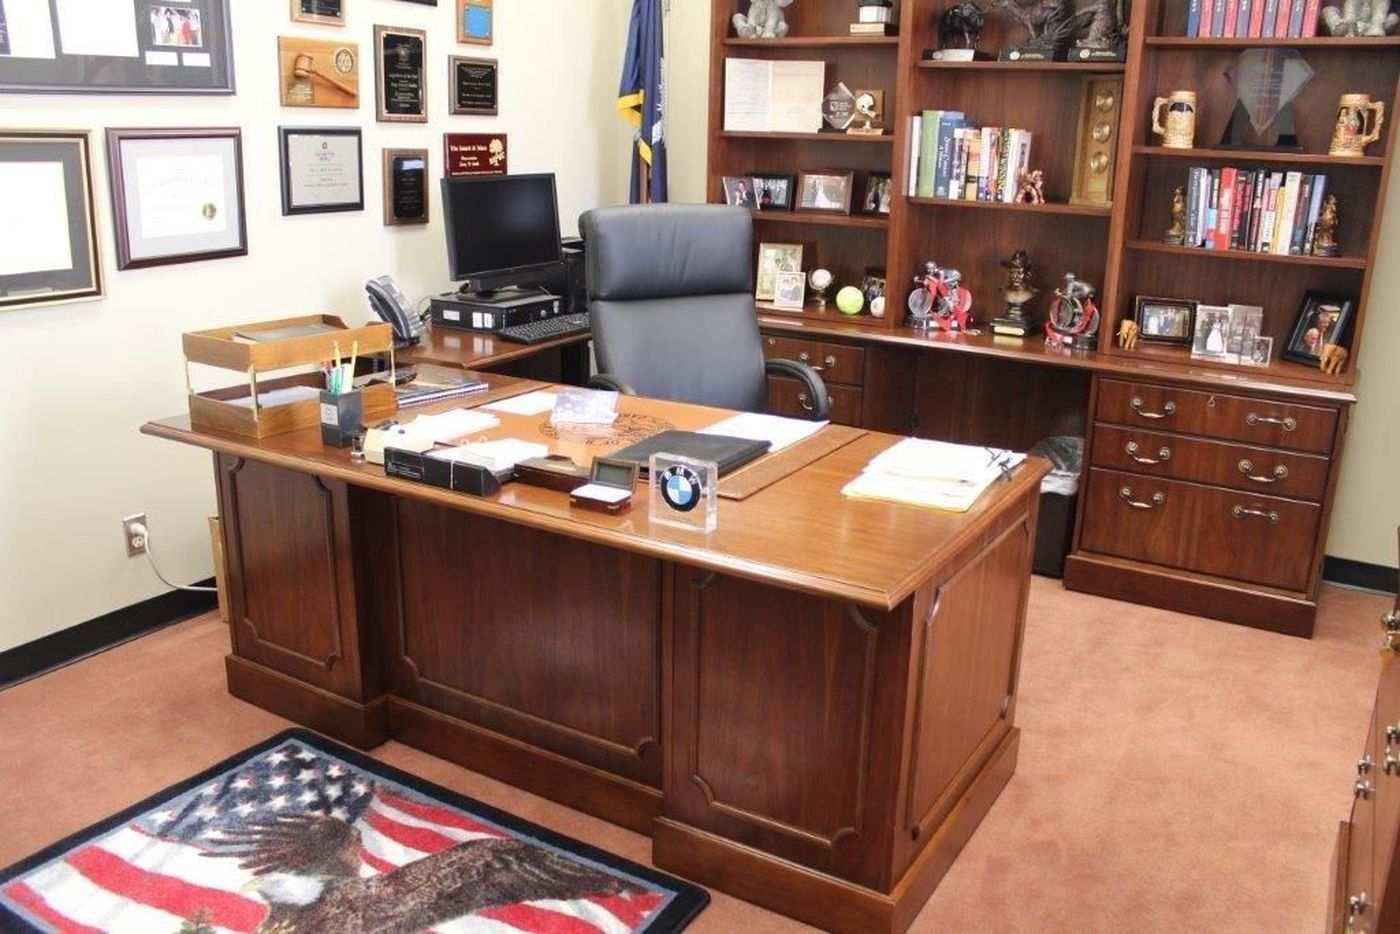 Sc House Spends $2 Million On Furniture For Lawmakers' Offices With Barr Credenzas (Photo 28 of 30)